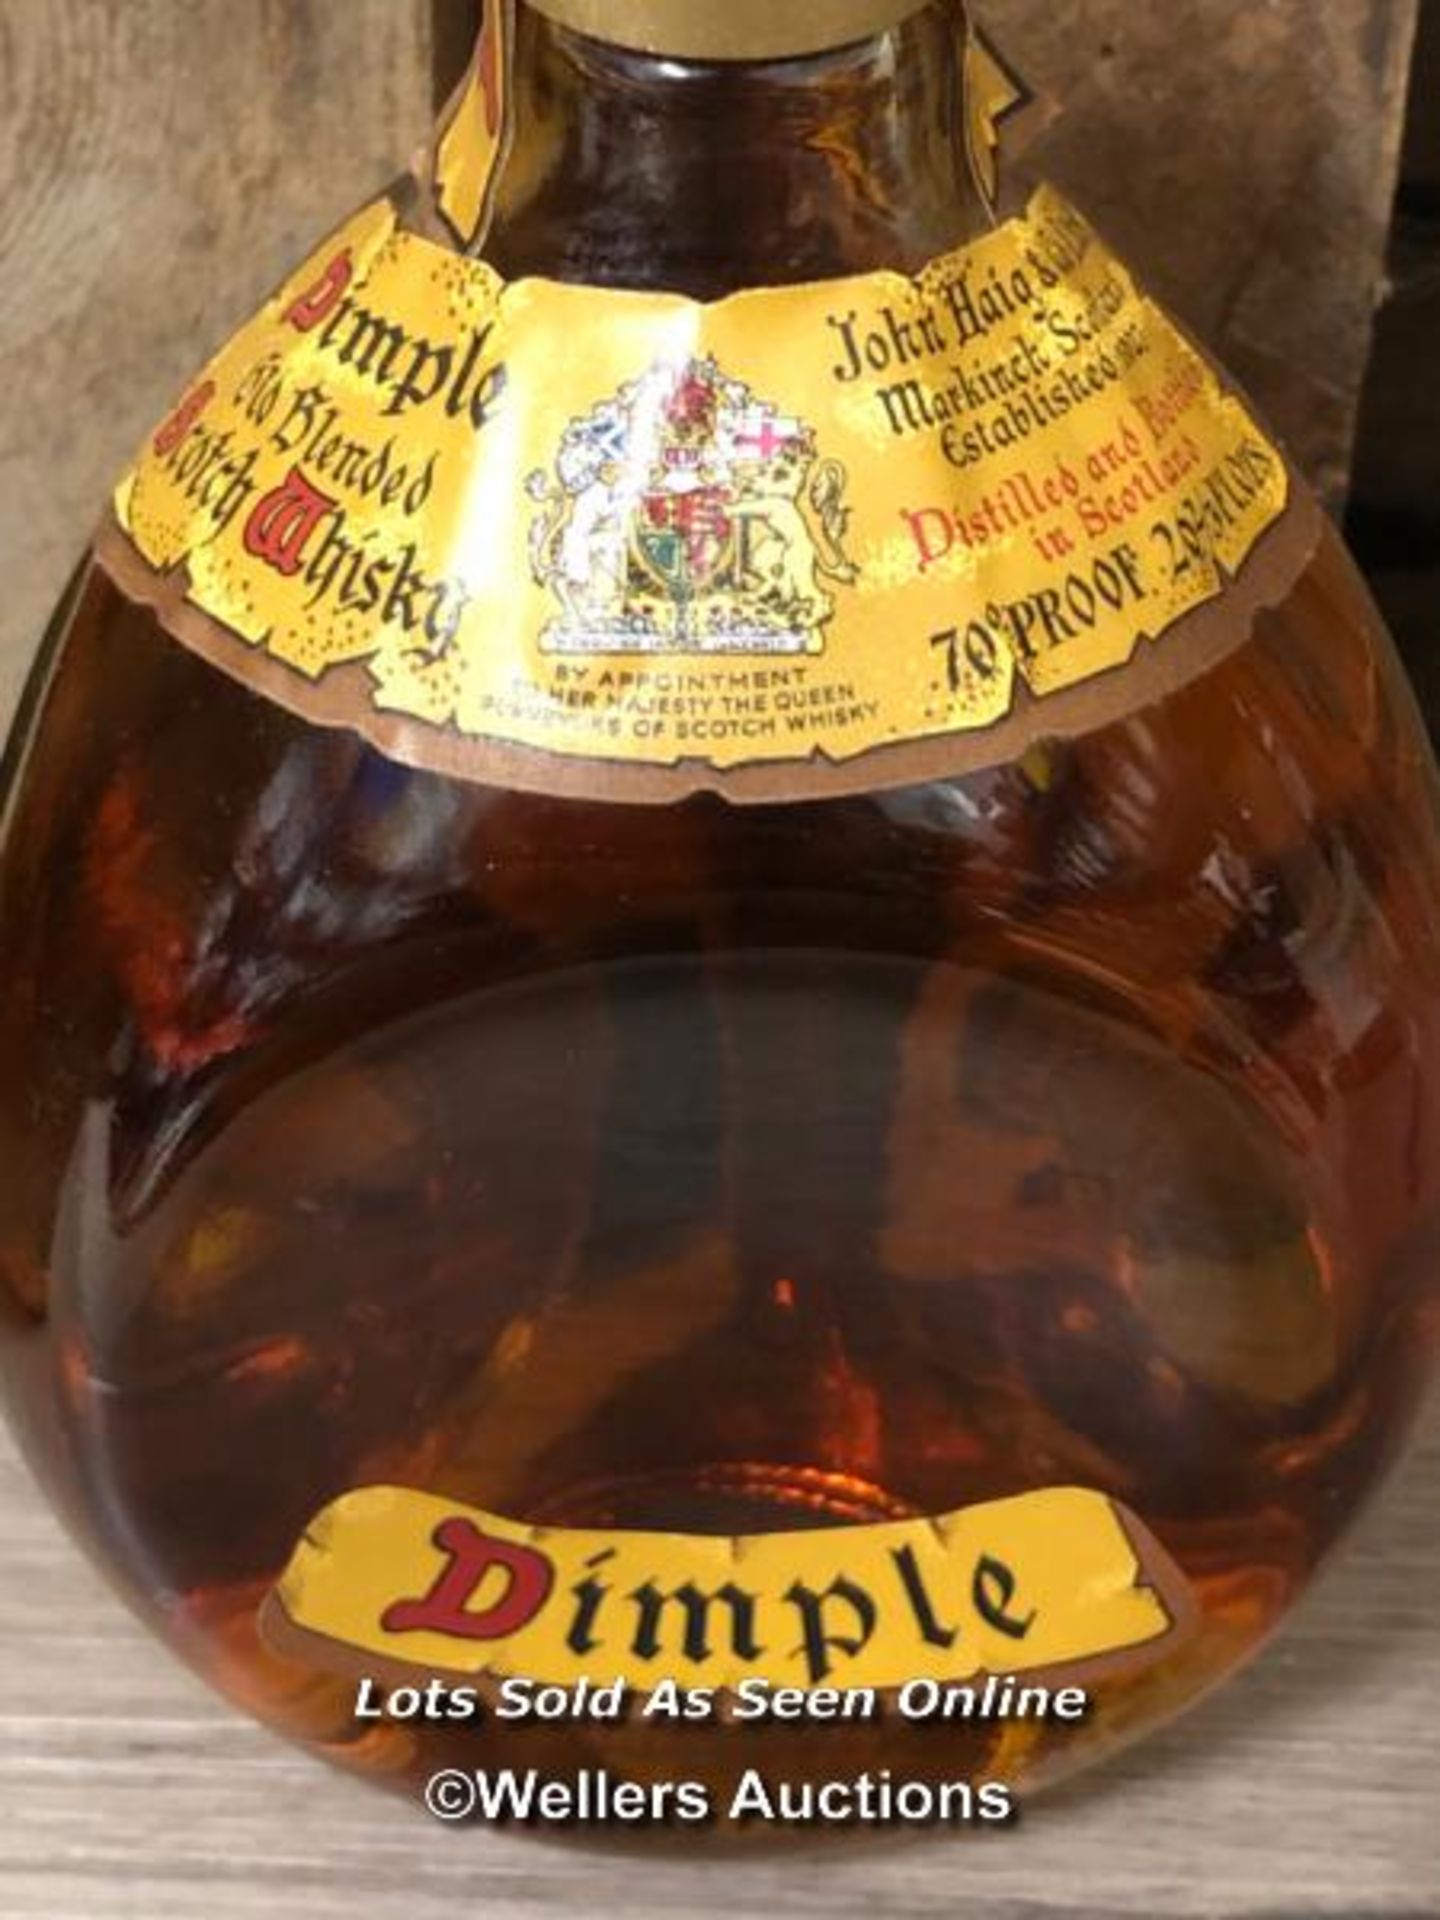 JOHN HAIG & CO. DIMPLE OLD BLENDED SCOTCH WHISKY, BOTTLED 1970'S, 75.7CL, 35% ABV, WITH ORIGINAL BOX - Image 3 of 6